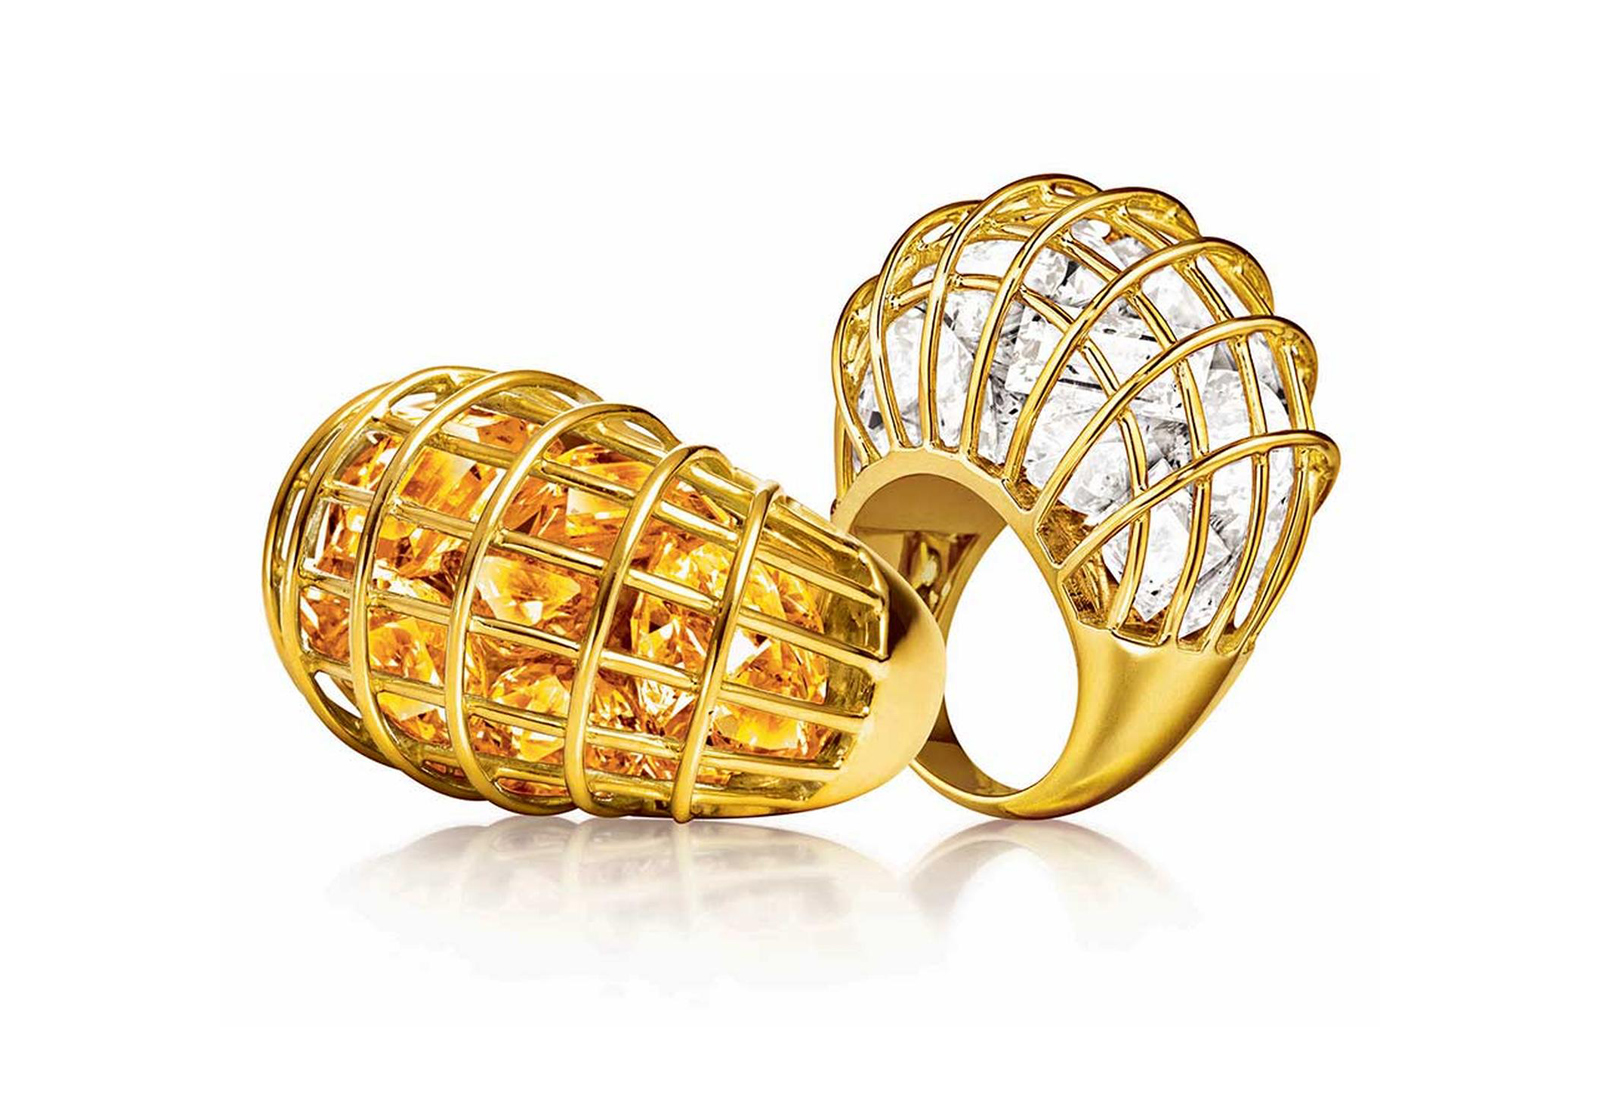 Veradura ‘Cage’ rings in 18k yellow gold, with citrine and rock crystal